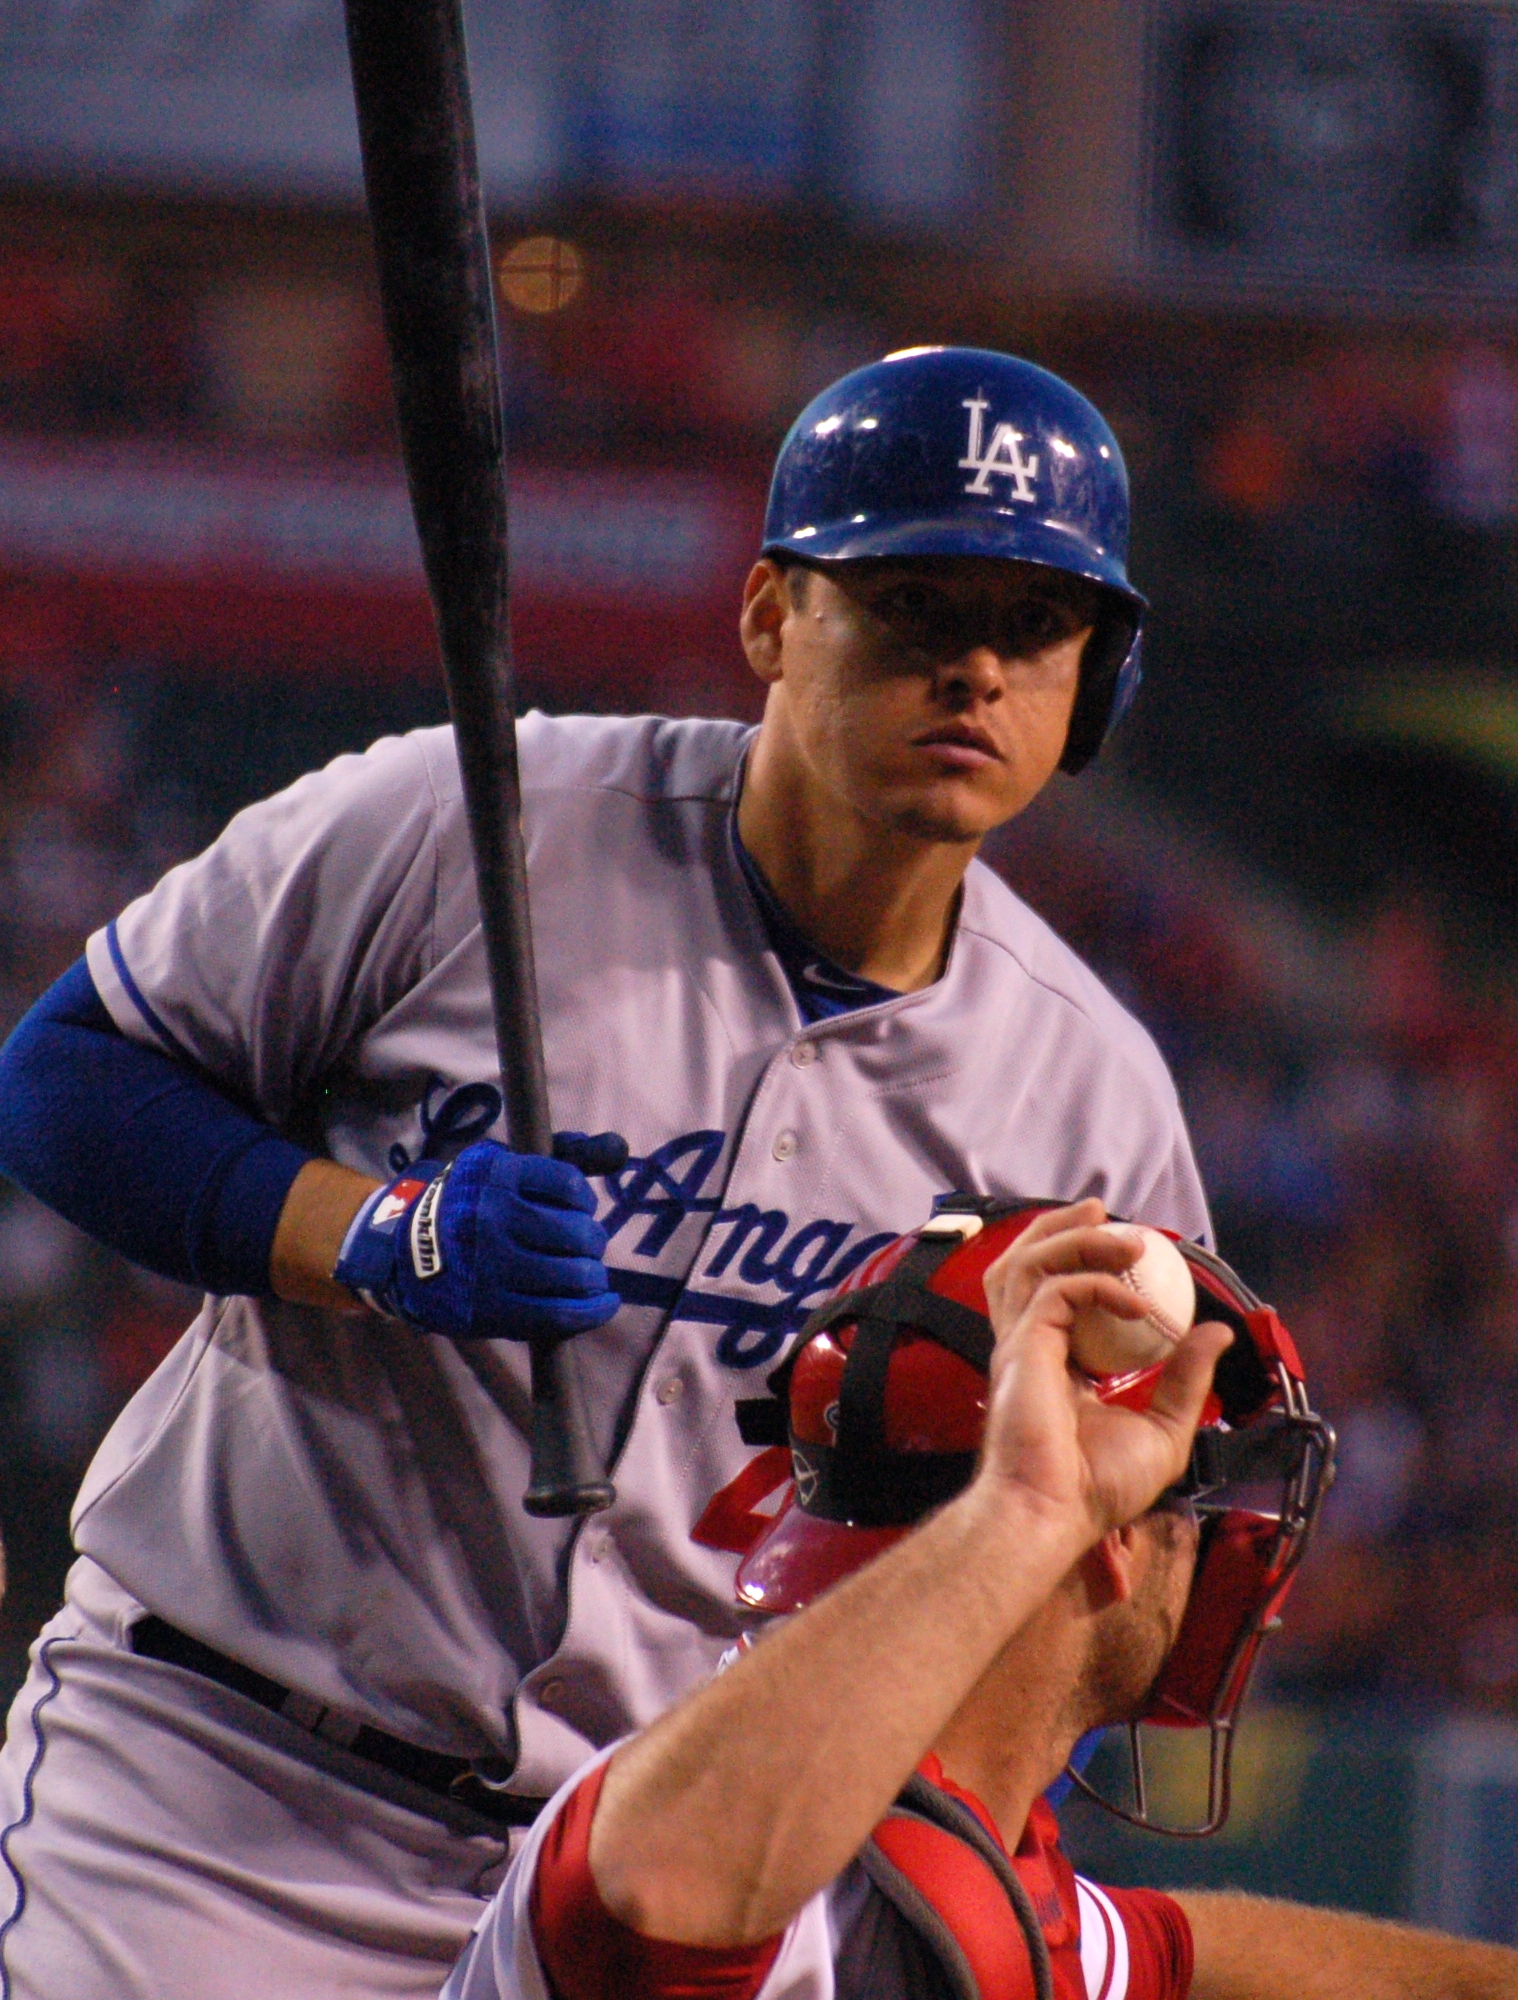 Cruz with the Los Angeles Dodgers